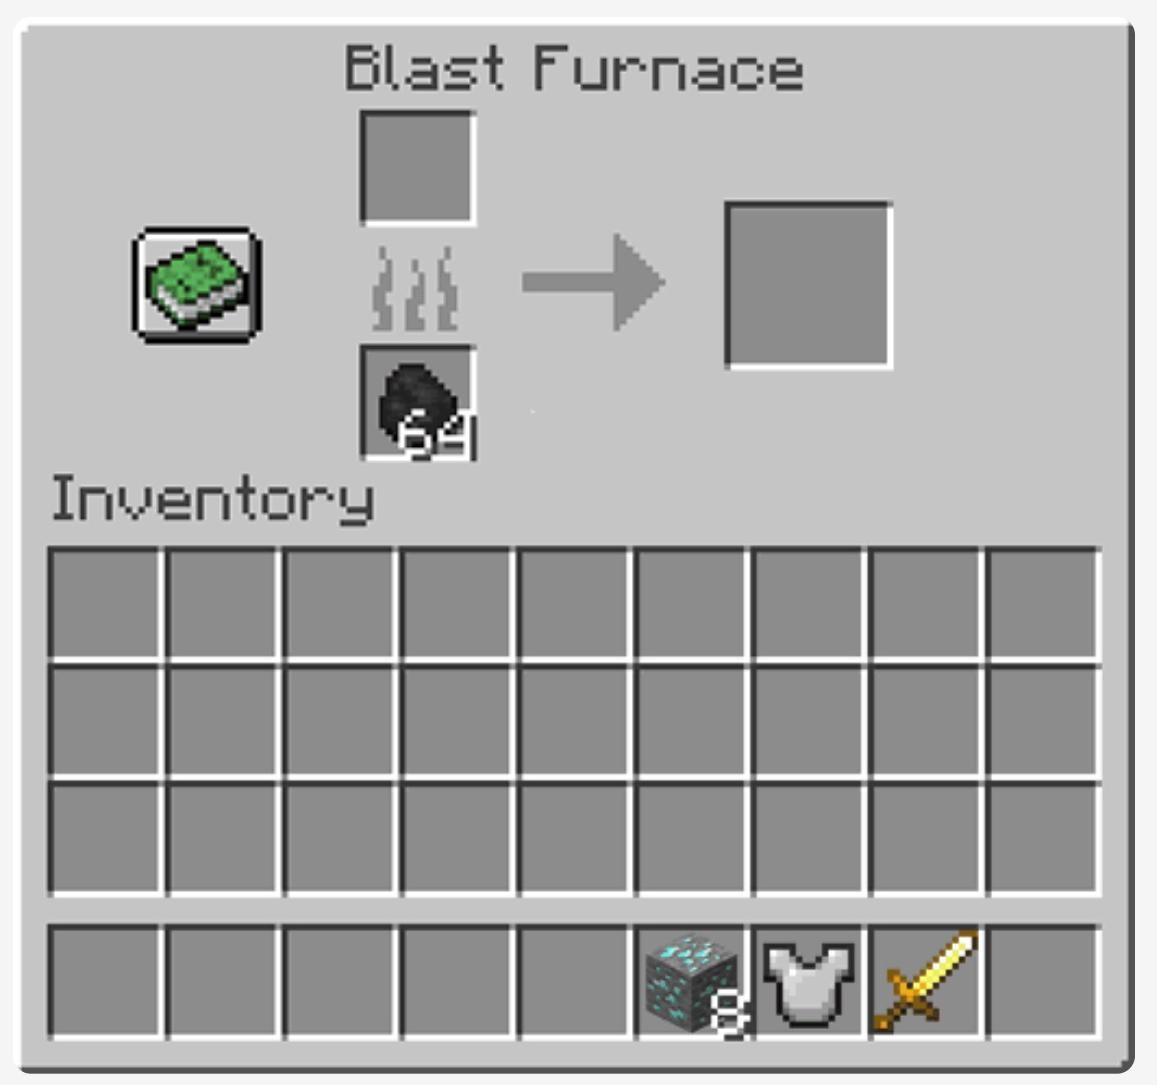 How To Make a Blast Furnace in Minecraft? (Ultimate Recipe Guide) - Decidel